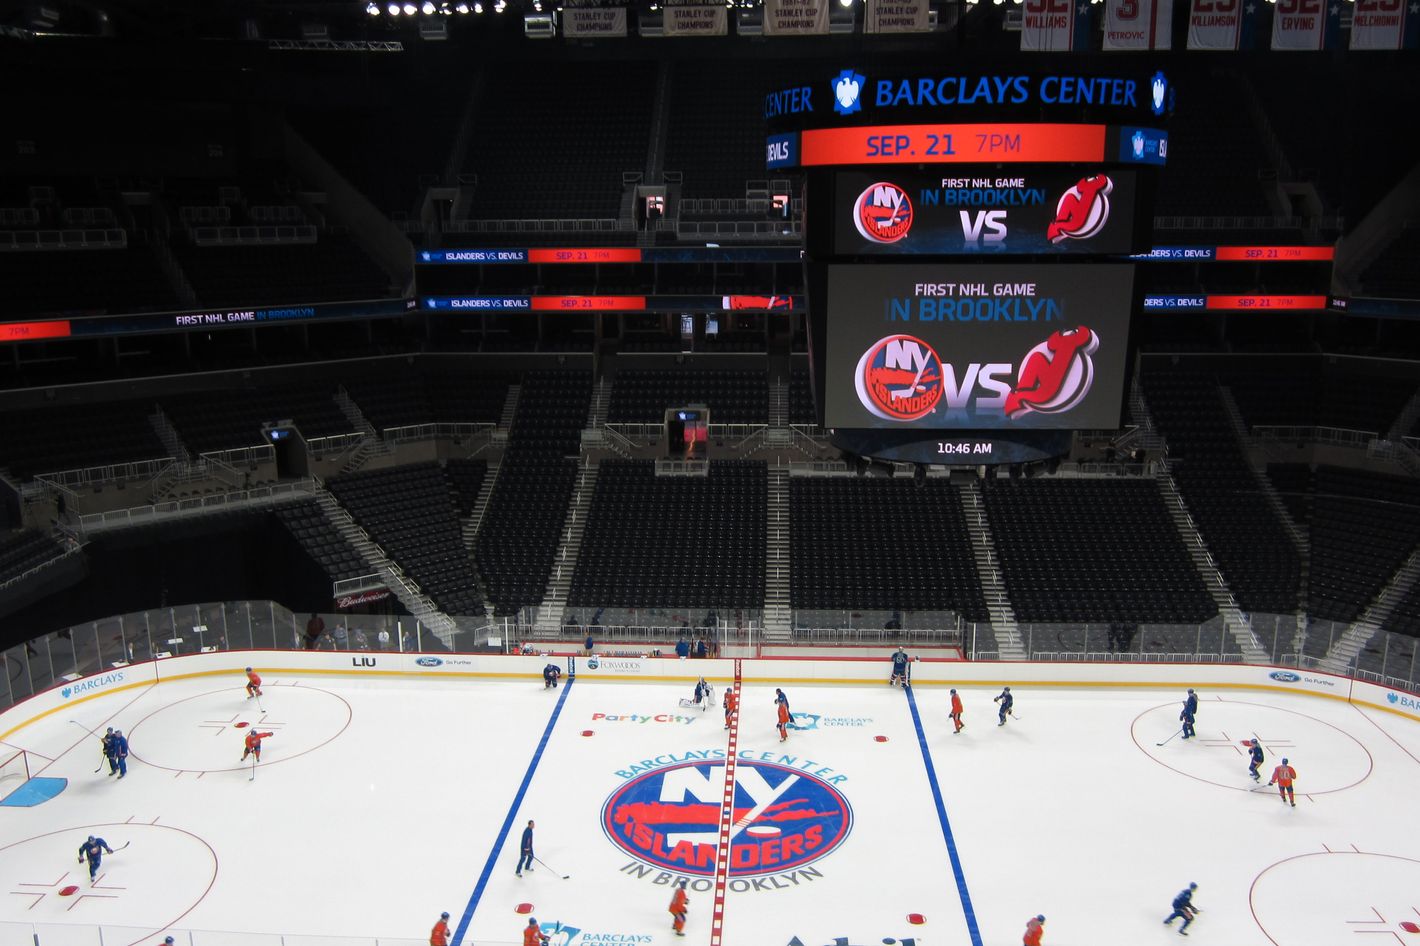 New York Islanders Fans Excited Move to Barclays Center 